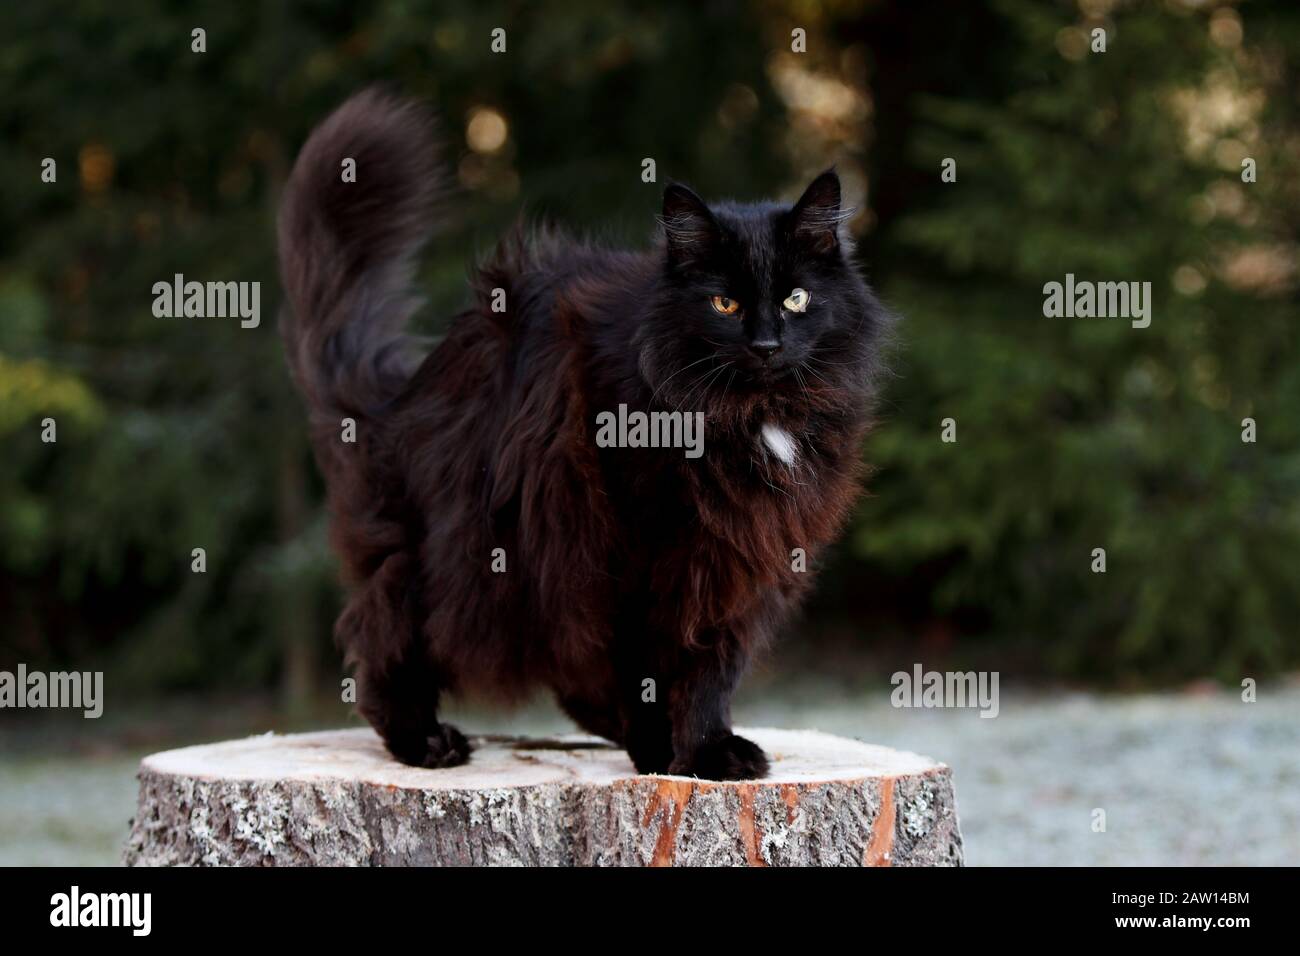 A black norwegian forest cat female standing on a stump Stock Photo